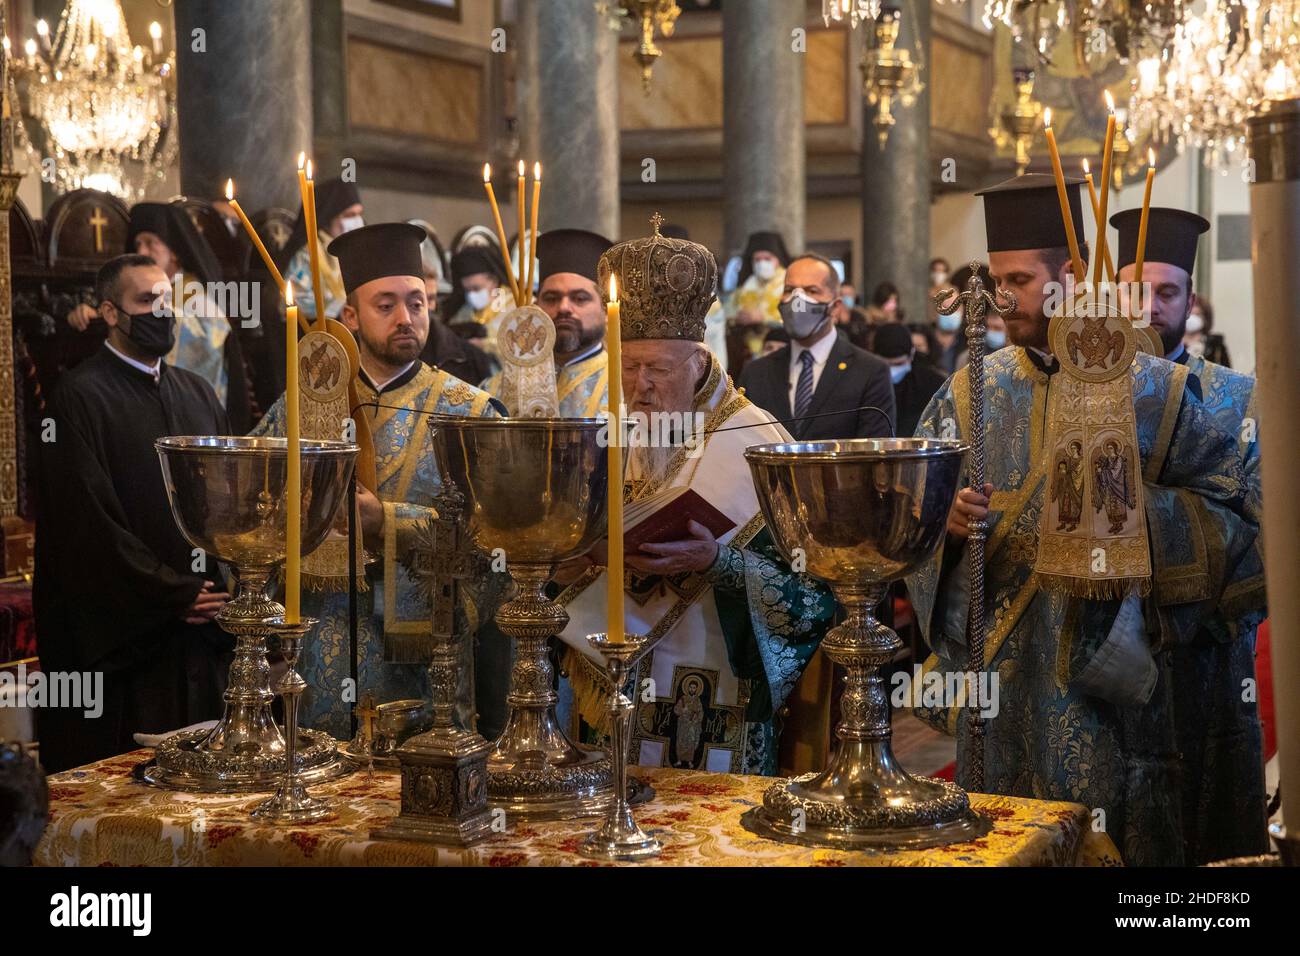 Greek Orthodox Ecumenical Patriarch Bartholomew I of Constantinople conducts the Epiphany mass as part of Epiphany day celebrations at the Church. Stock Photo